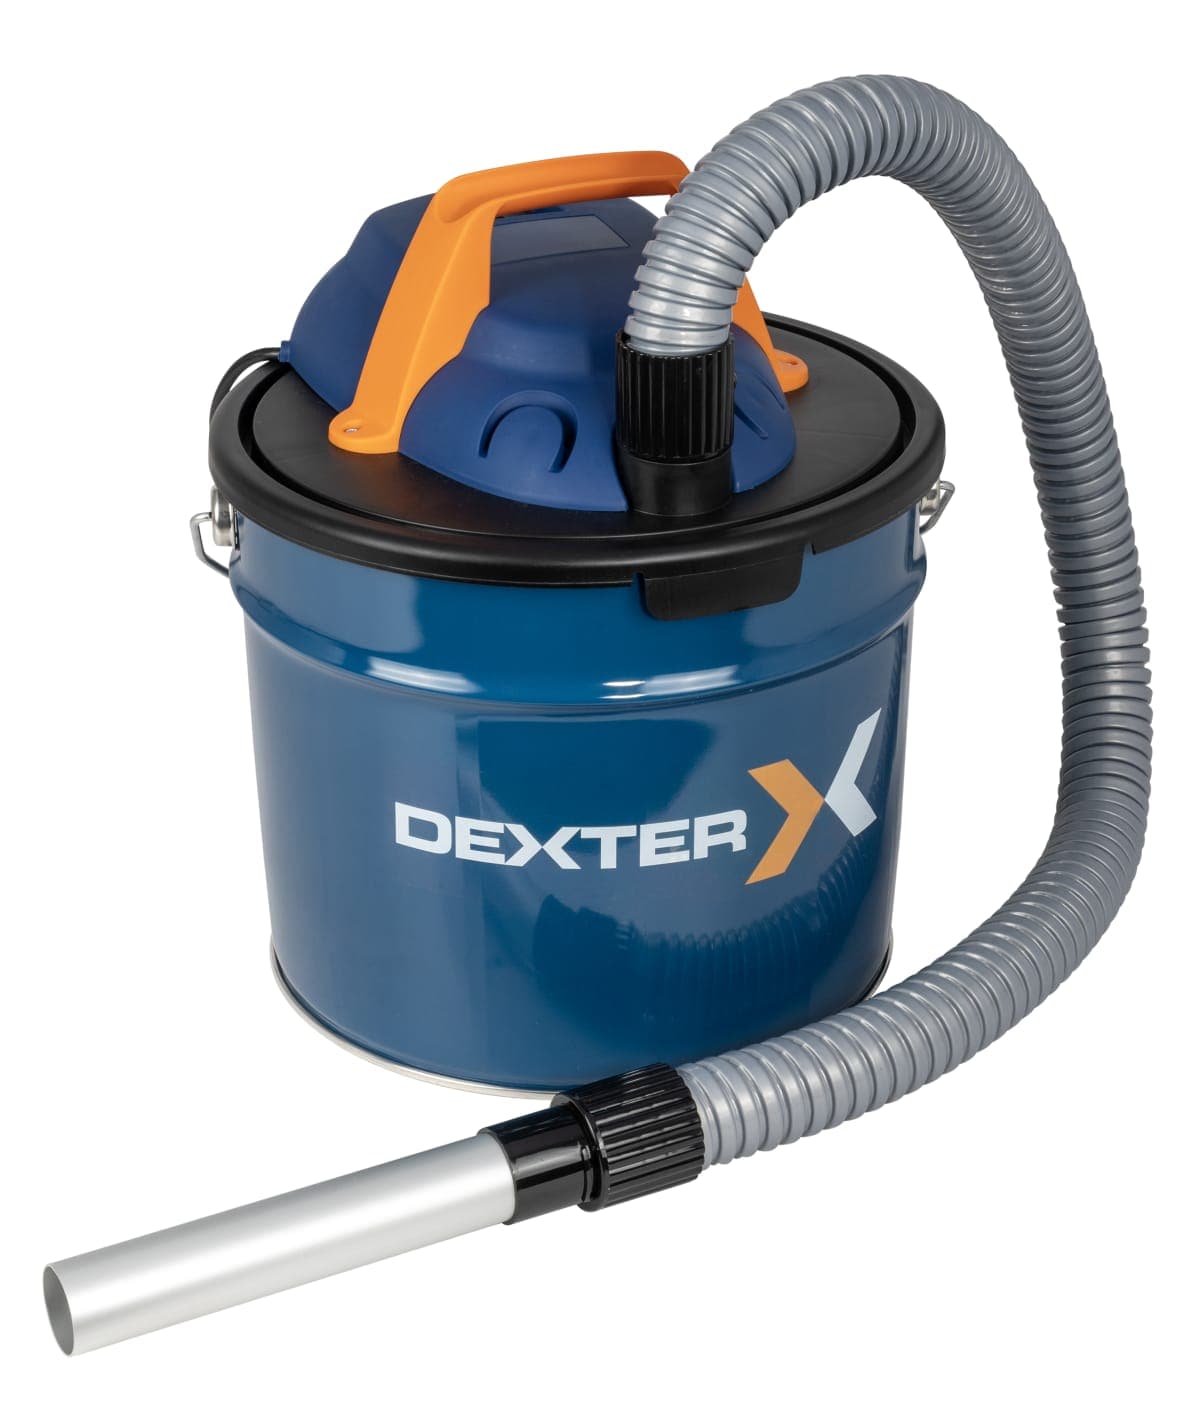 DEXTER BASIC ELECTRIC ASH EXTRACTOR, 1000 W, 17 LITRES, 17 KPA